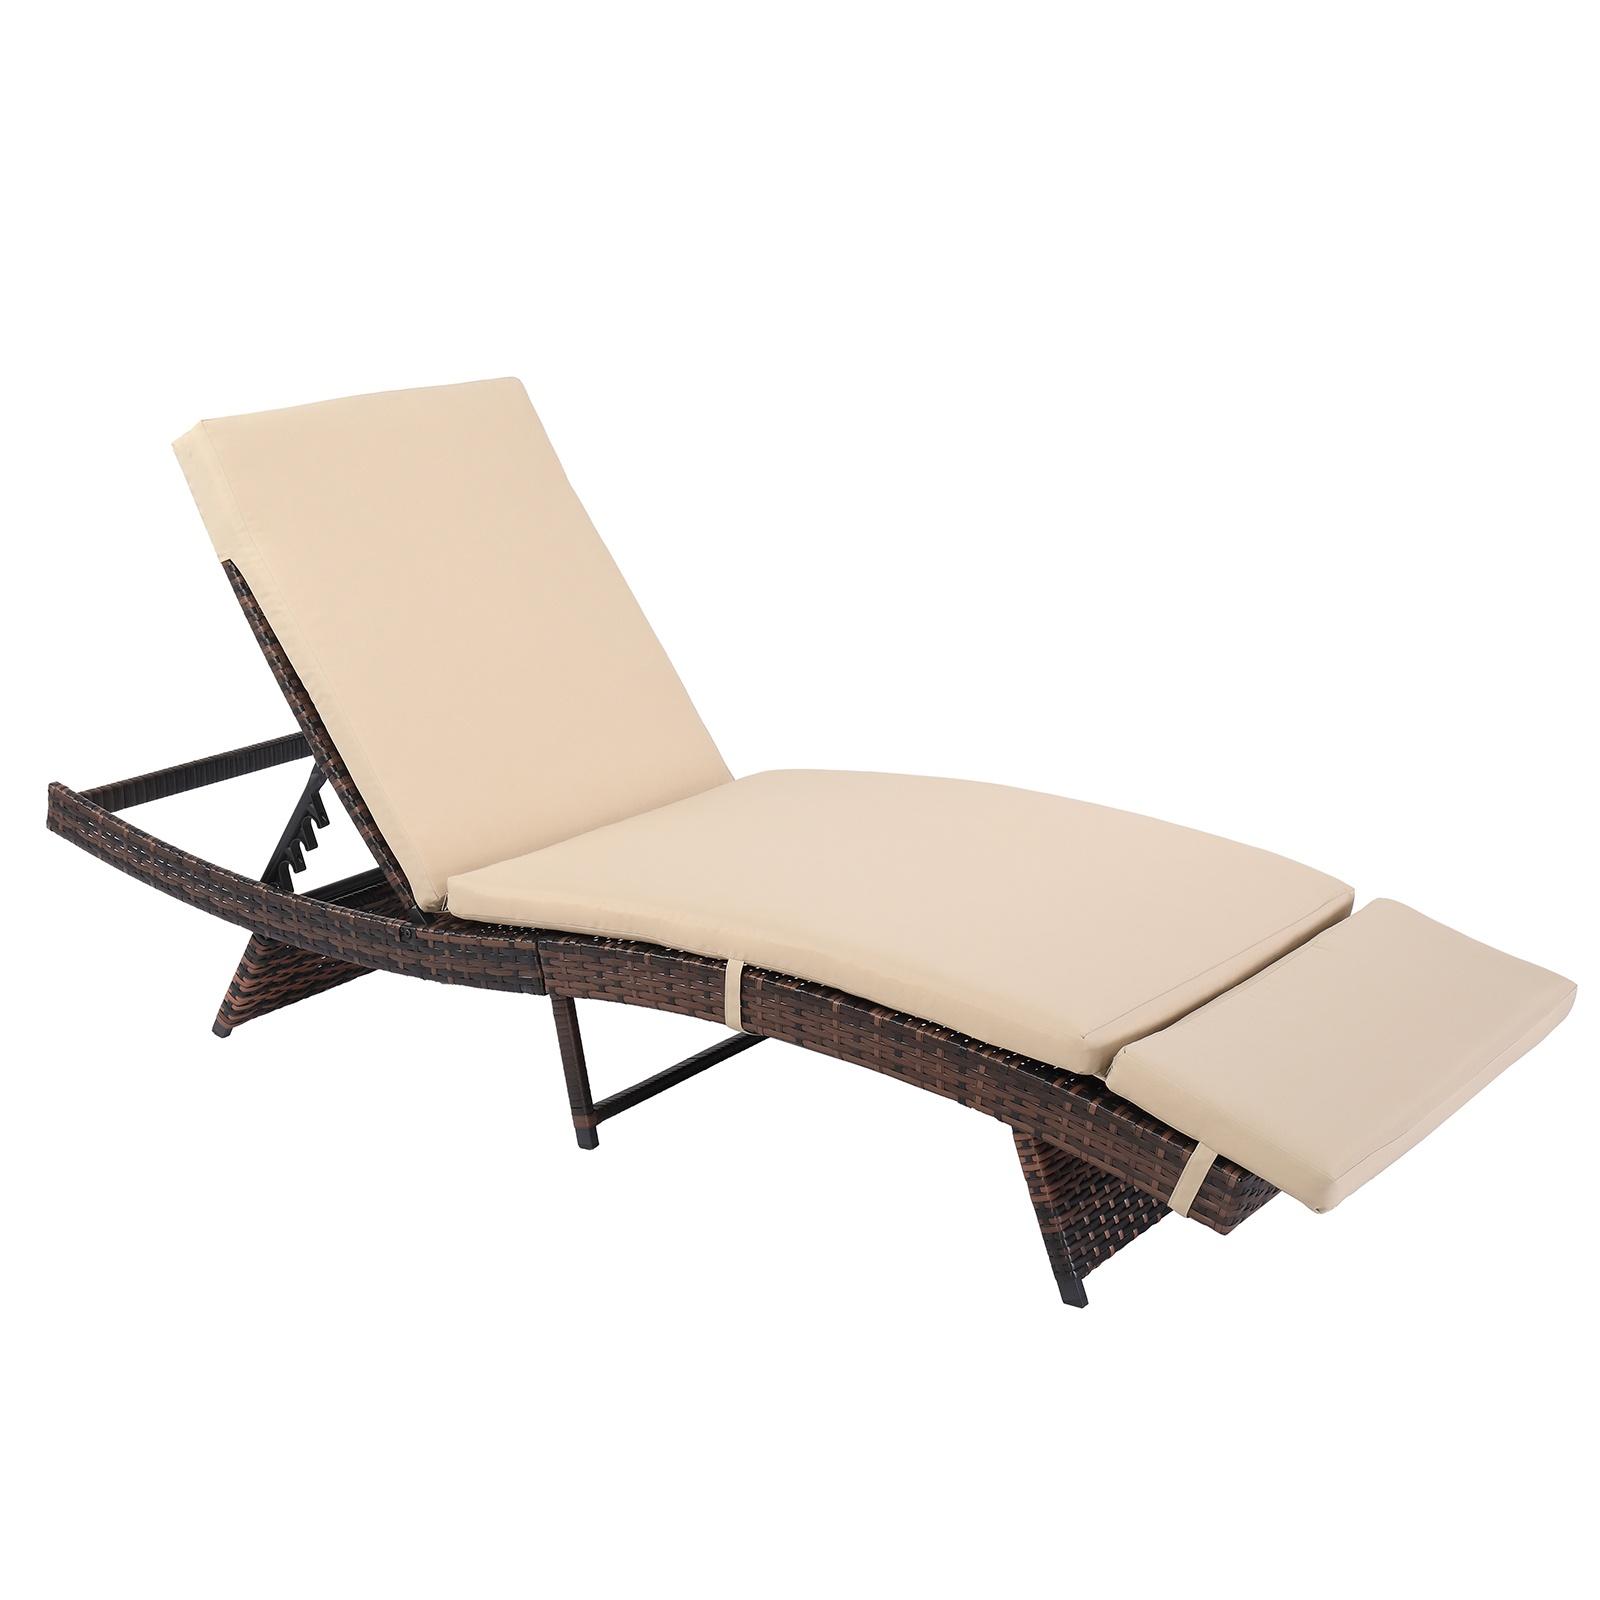 Black Rattan Chaise Lounge, Patio Lounge Chair with Canopy and Cushions, Outdoor Reclining Chair Furniture for Garden, Poolside, Deck, Backyard - image 2 of 10